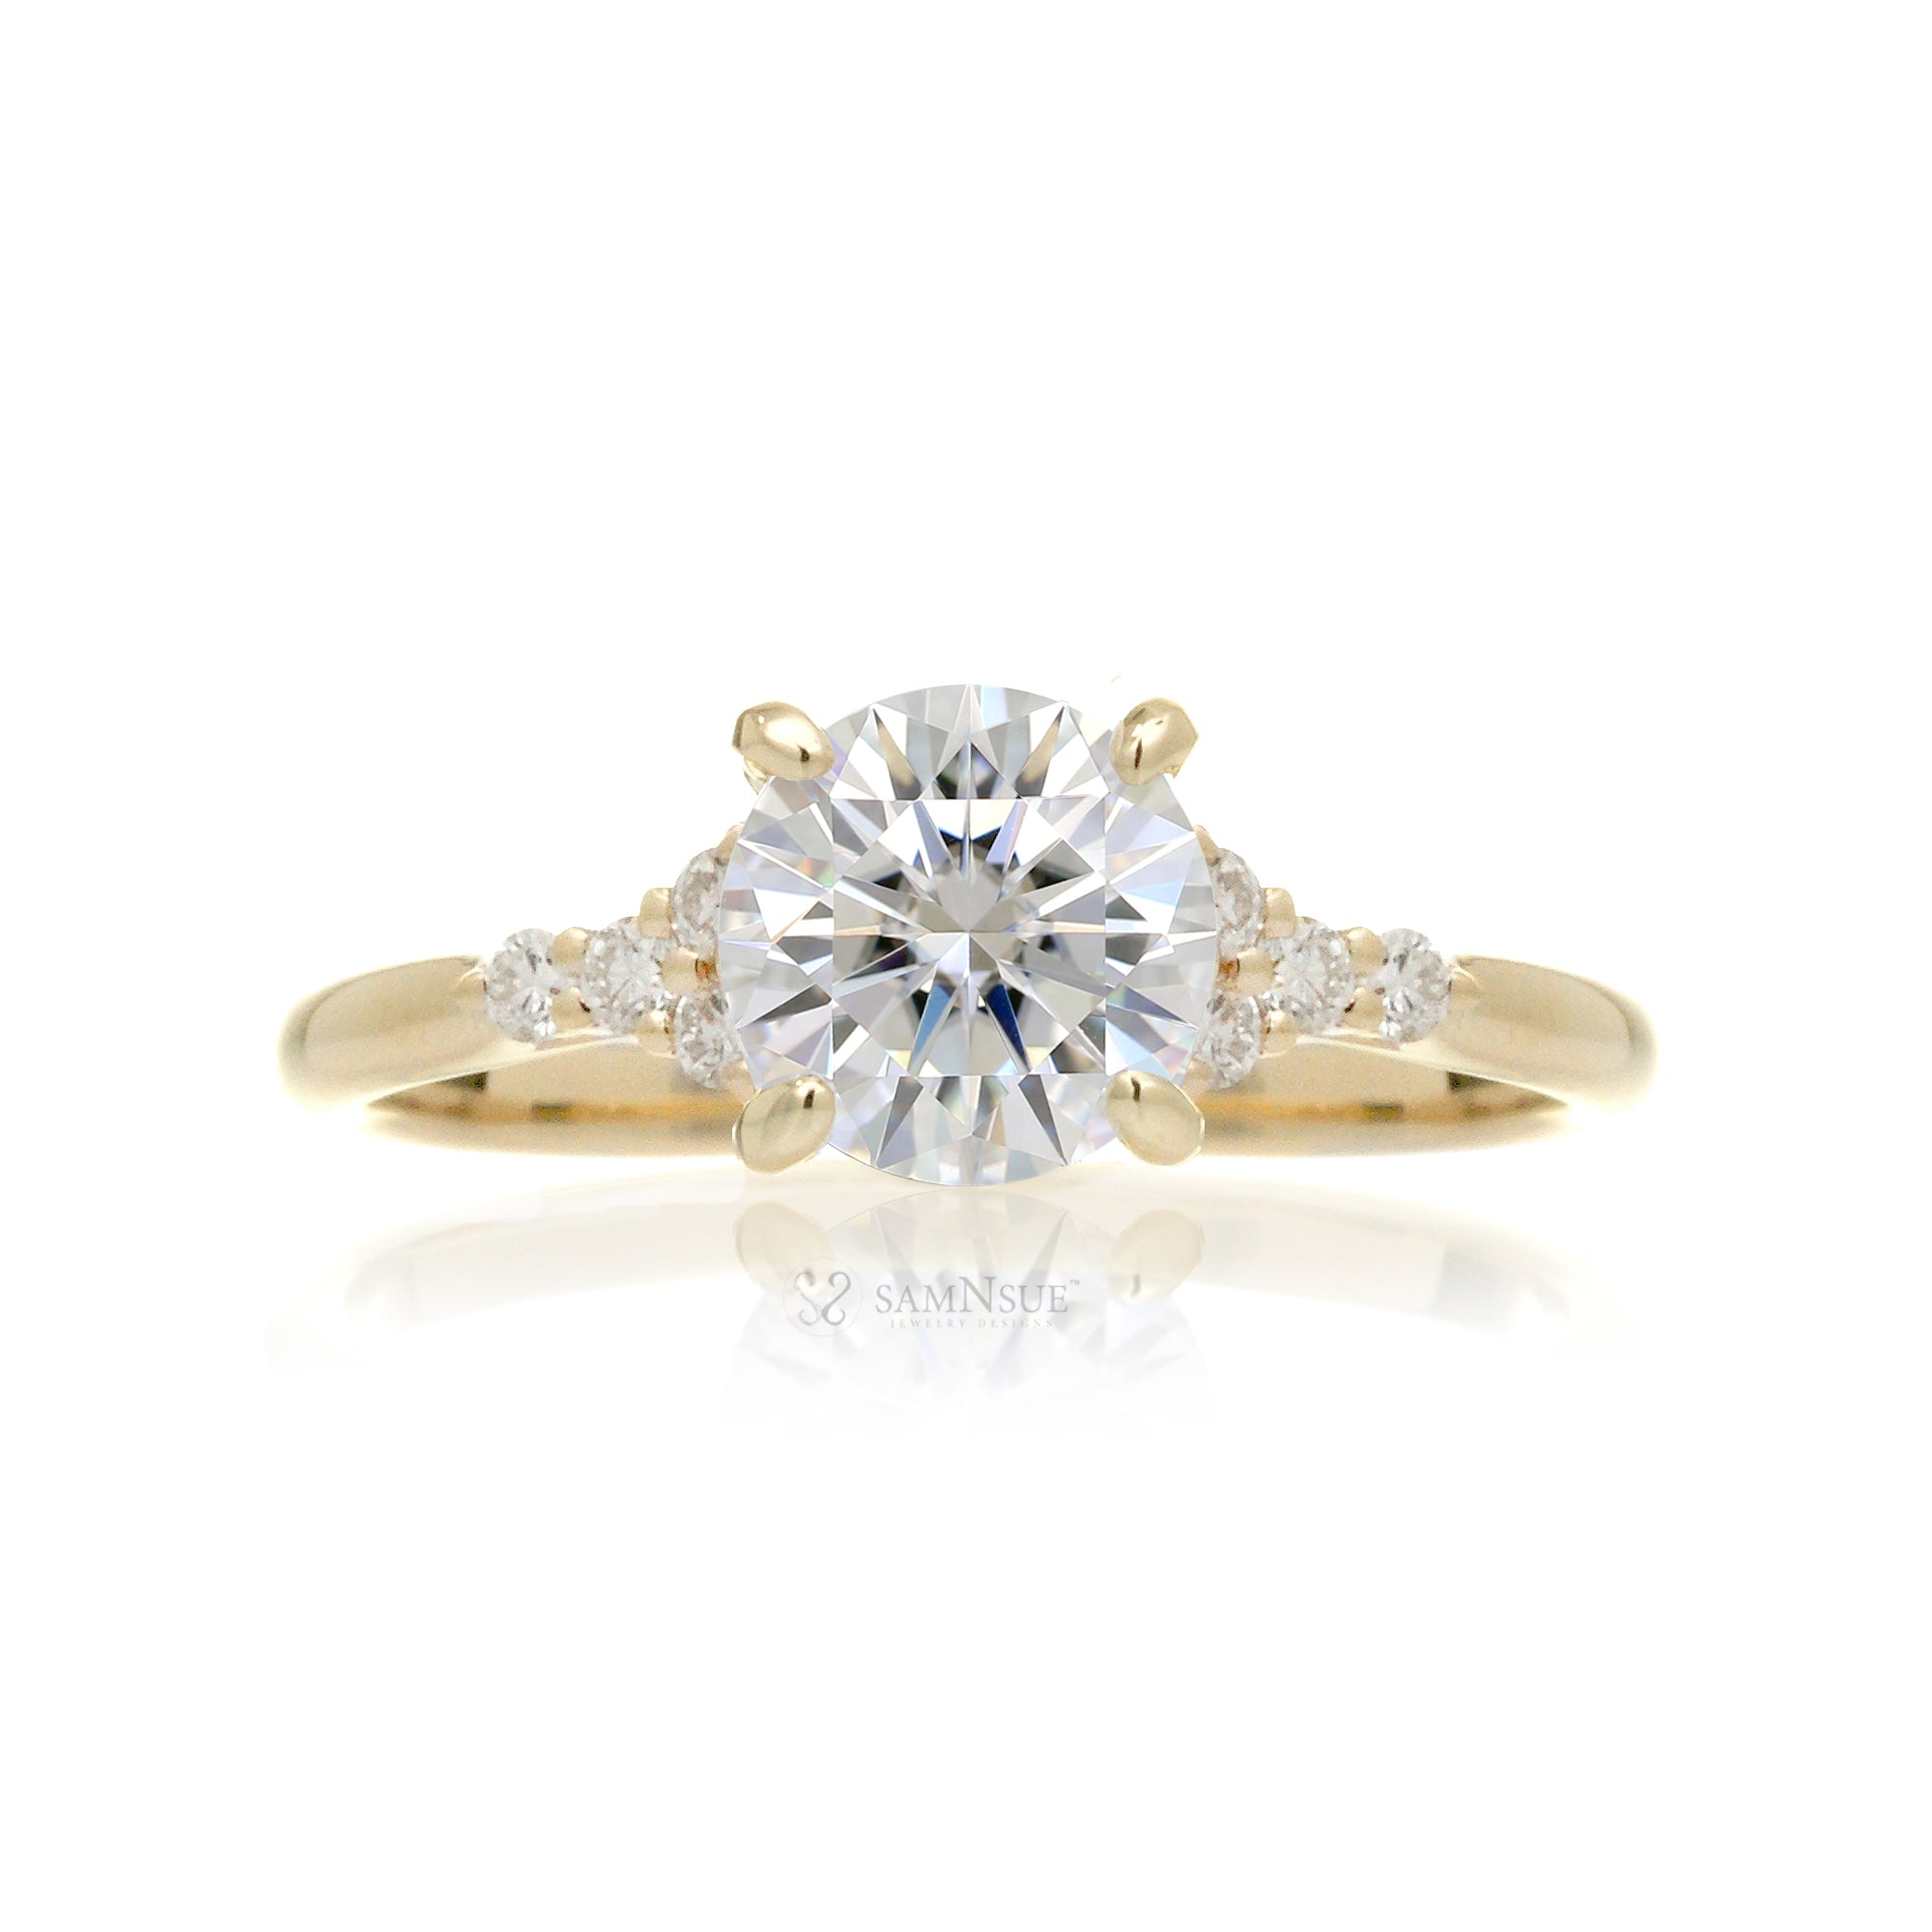 Round brilliant cut diamond engagement ring with rounded band in yellow gold